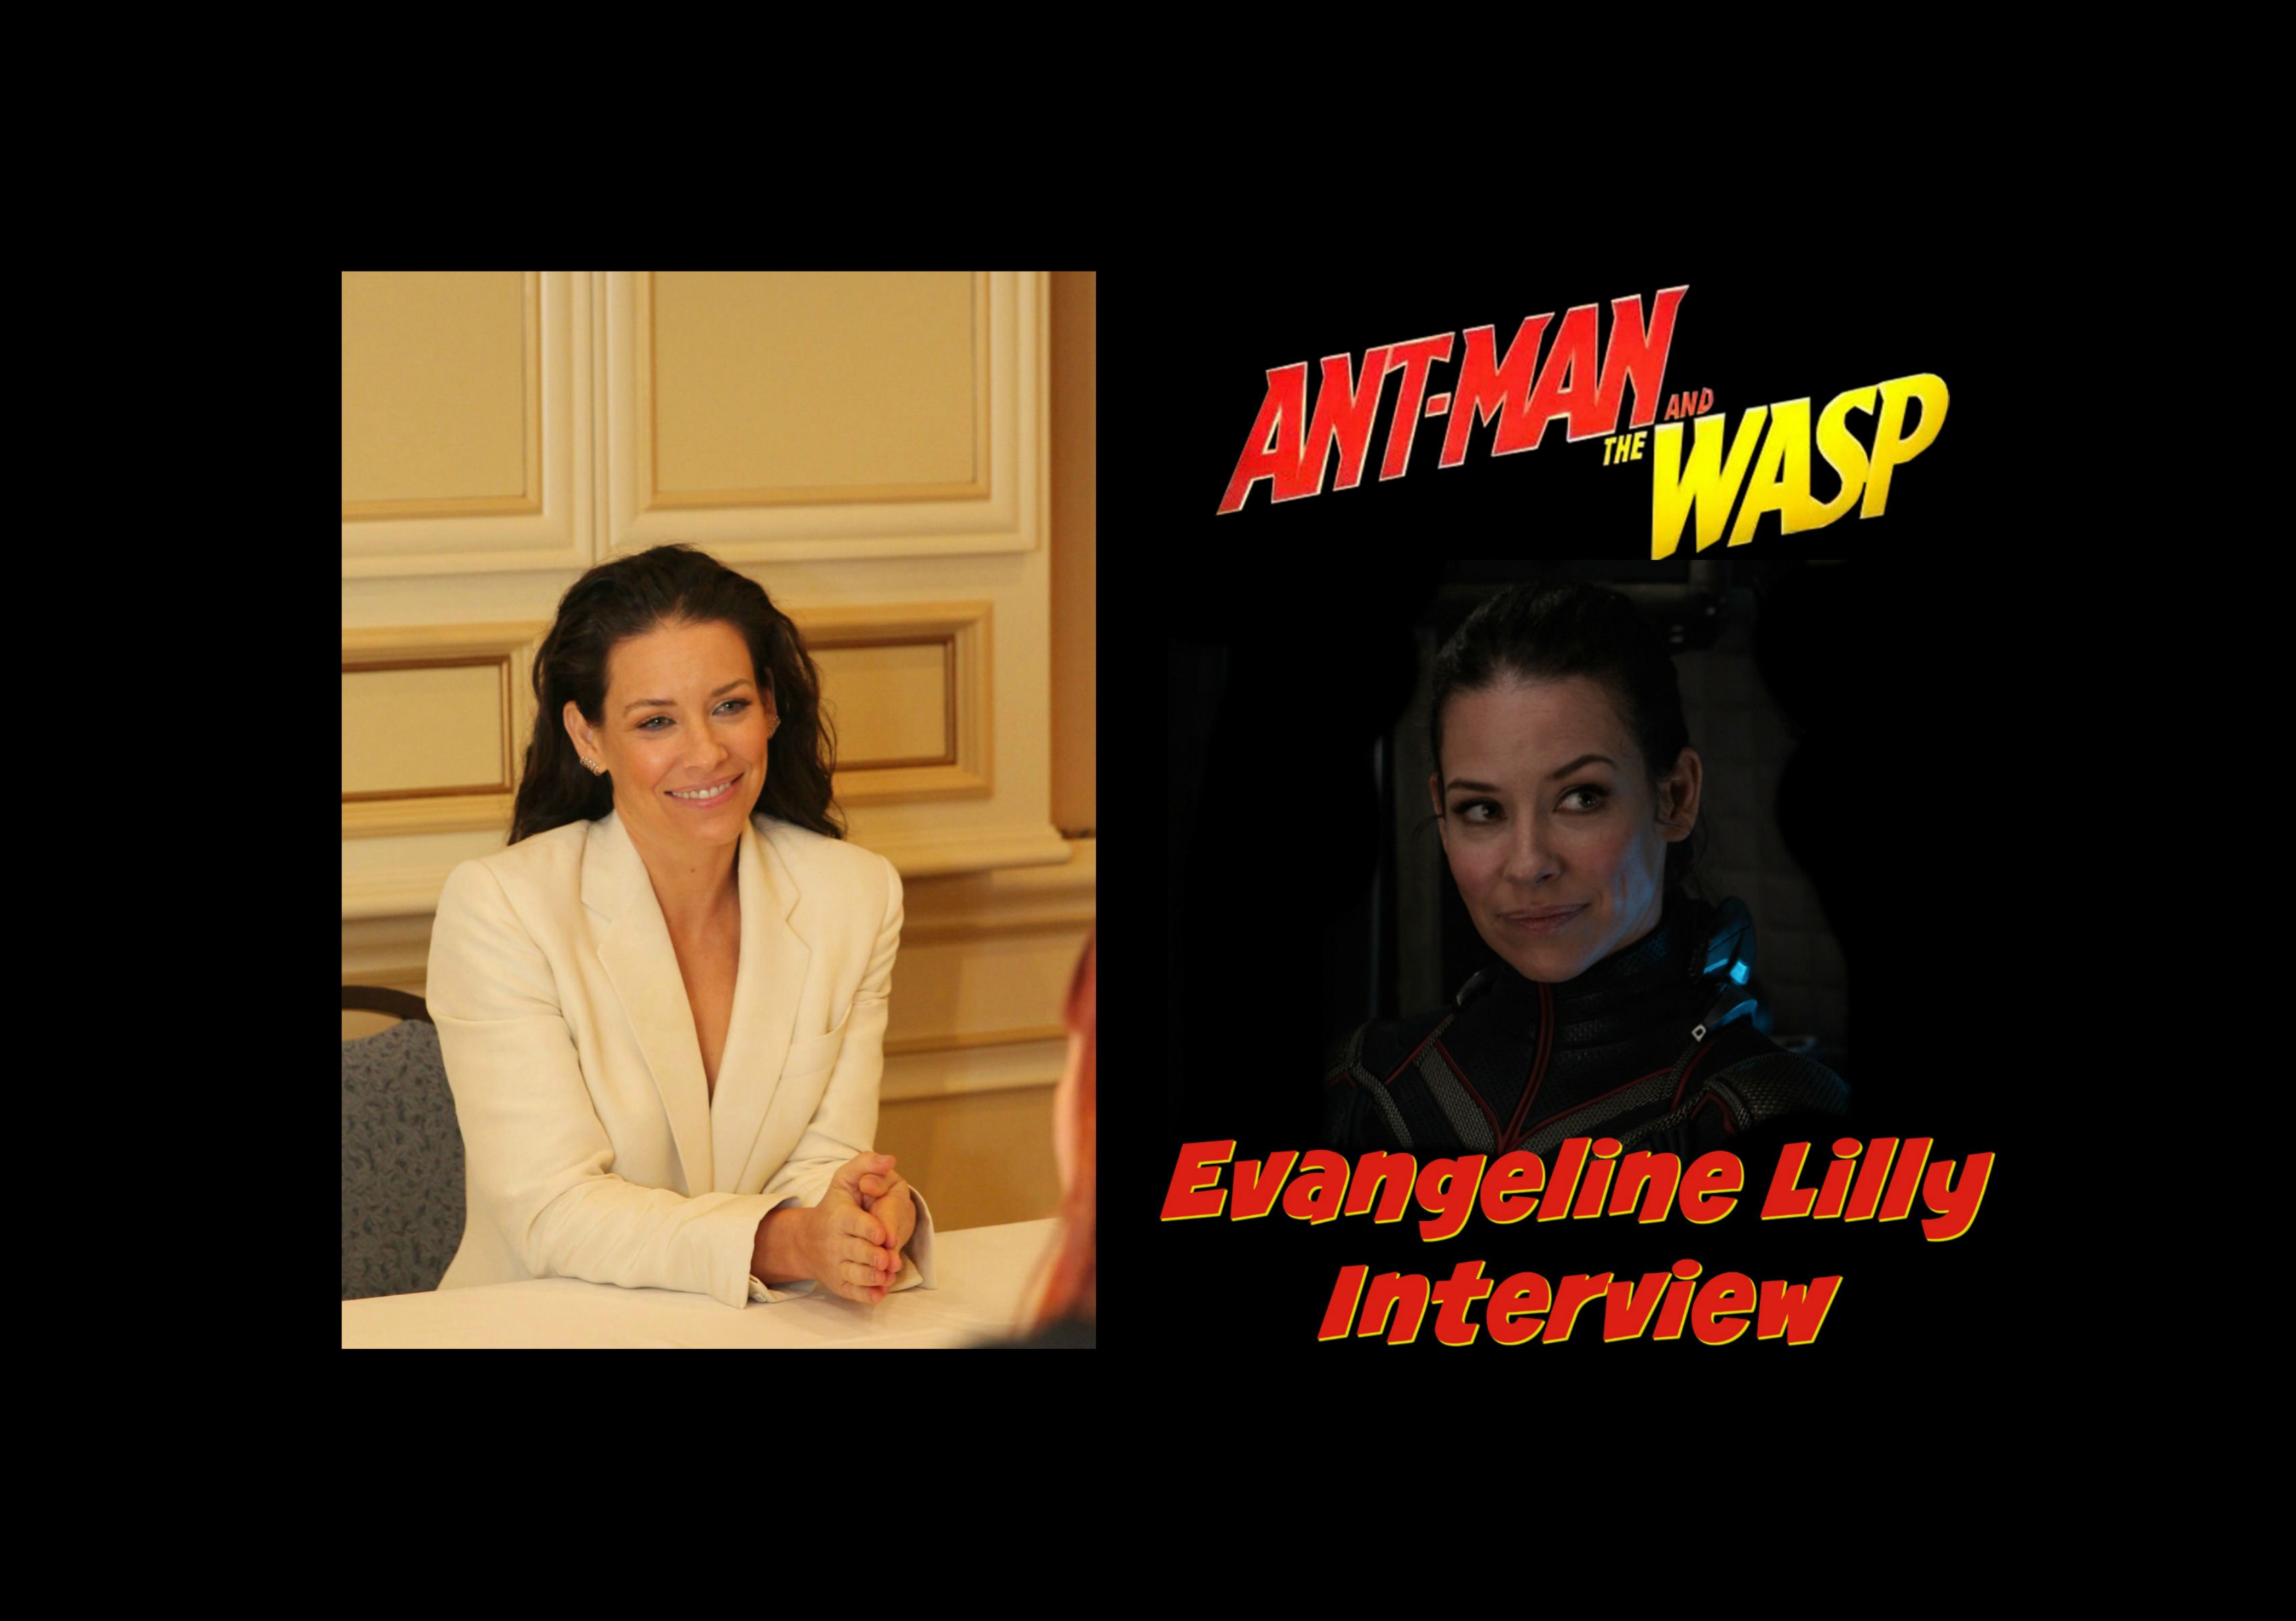 Evangeline Lilly Getting Fucked Anal - Evangeline Lilly is The Wasp - Interview - Marvel's 1st female superhero in  film title